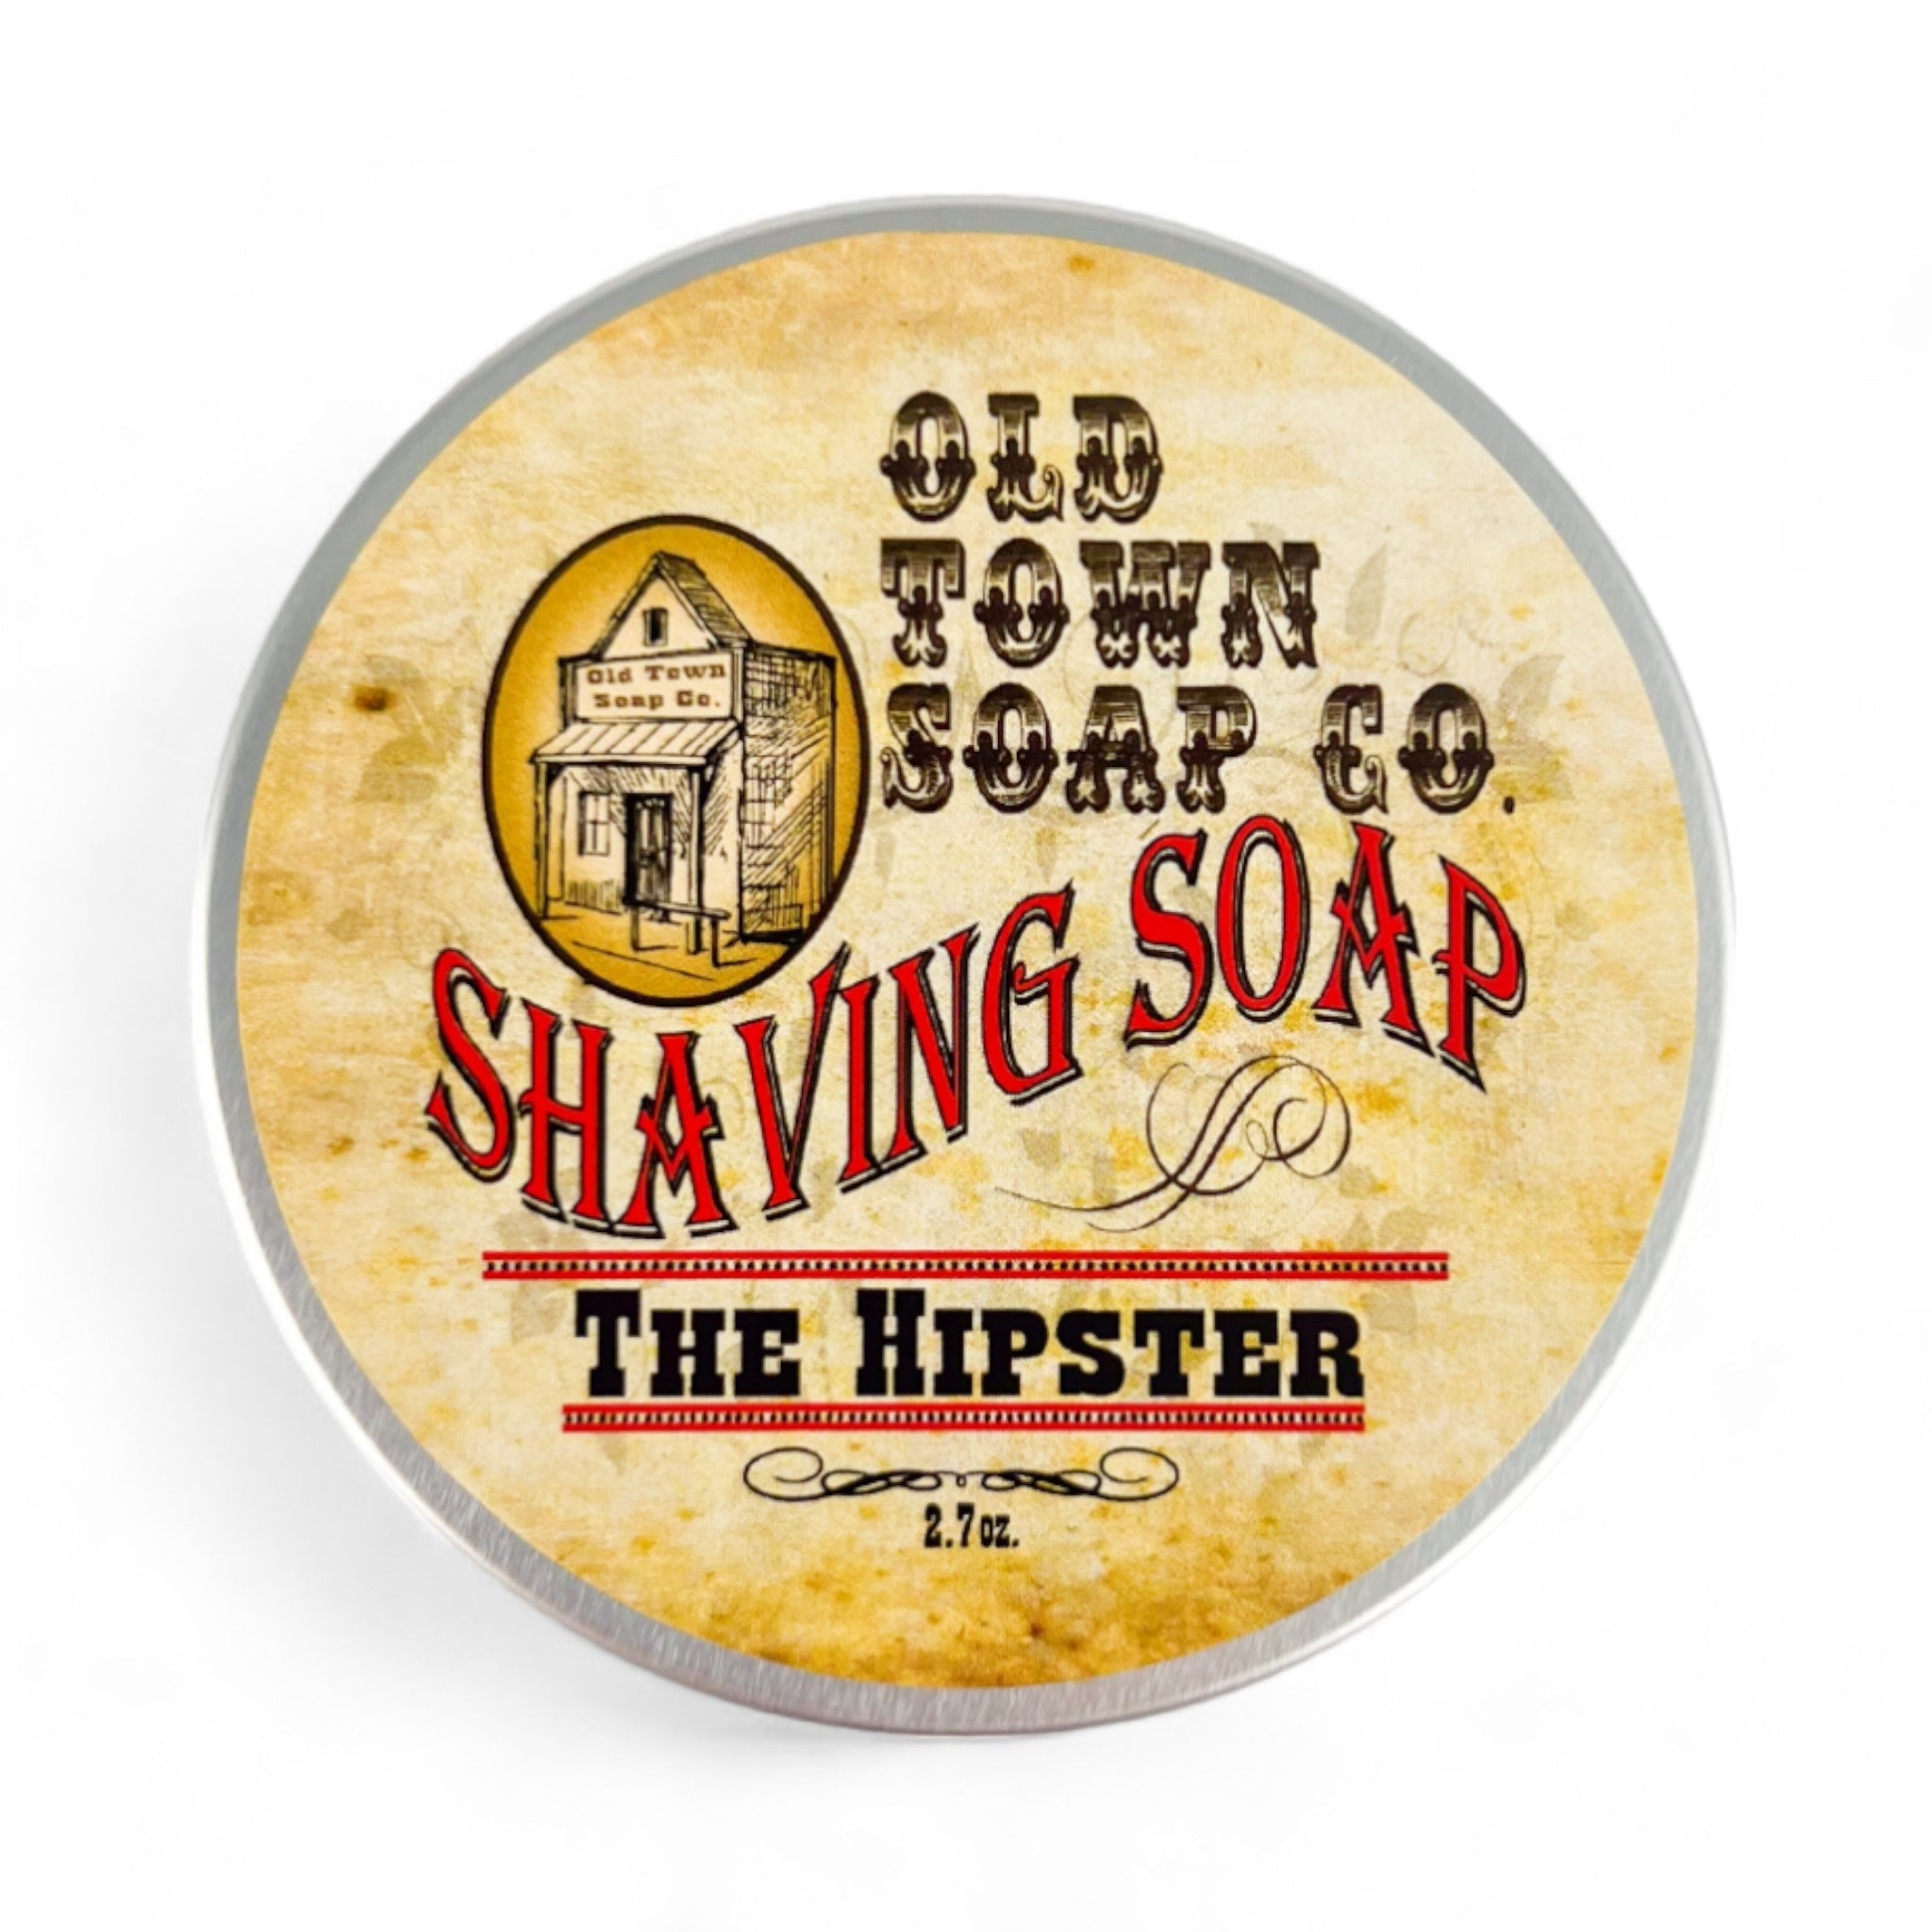 The Hipster -Shave Soap Tin - Old Town Soap Co.